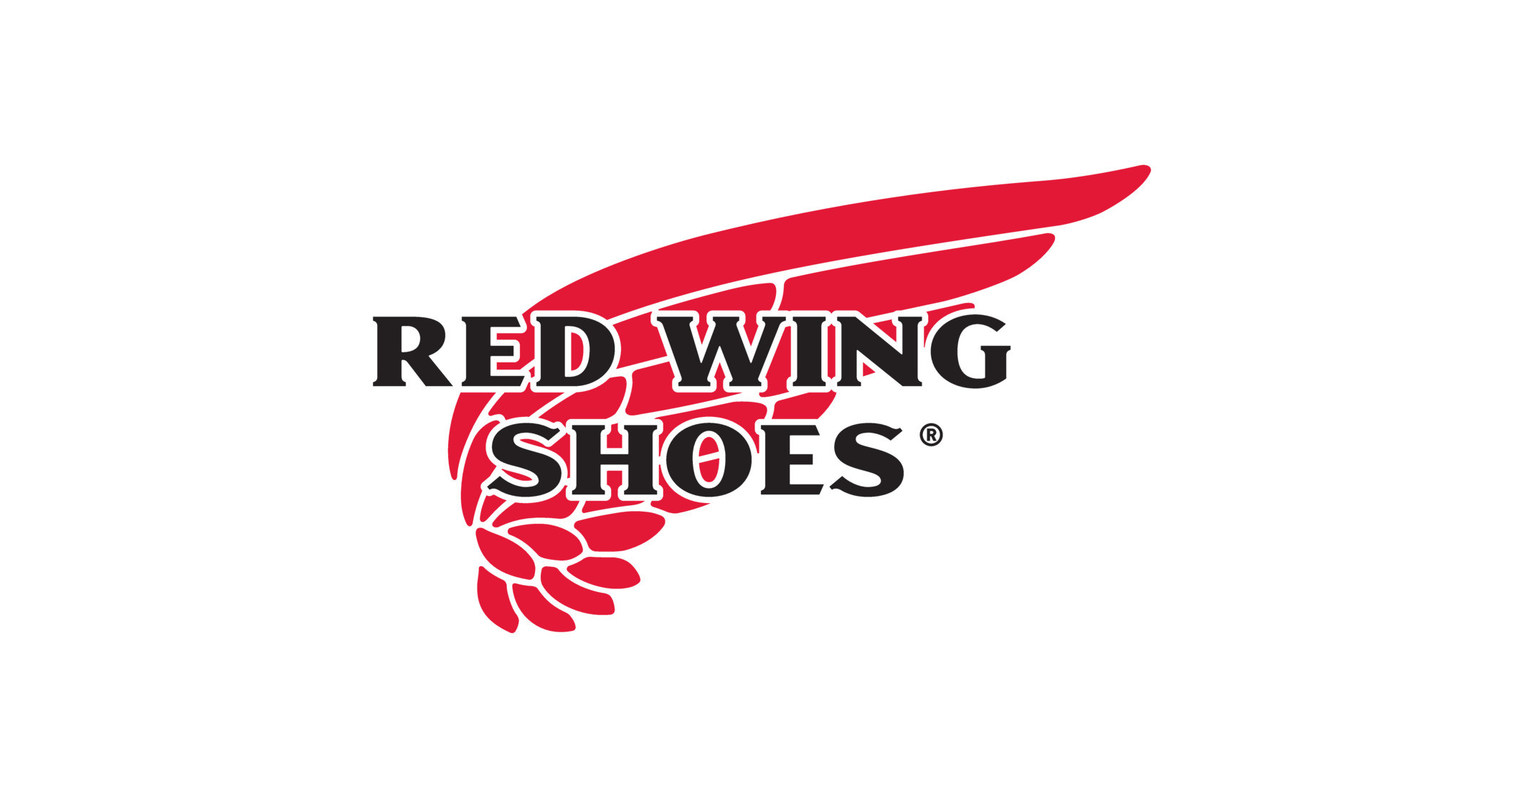 A First For 110-Year Footwear Leader: Red Wing Shoe Company Opens Flagship  Store In NYC